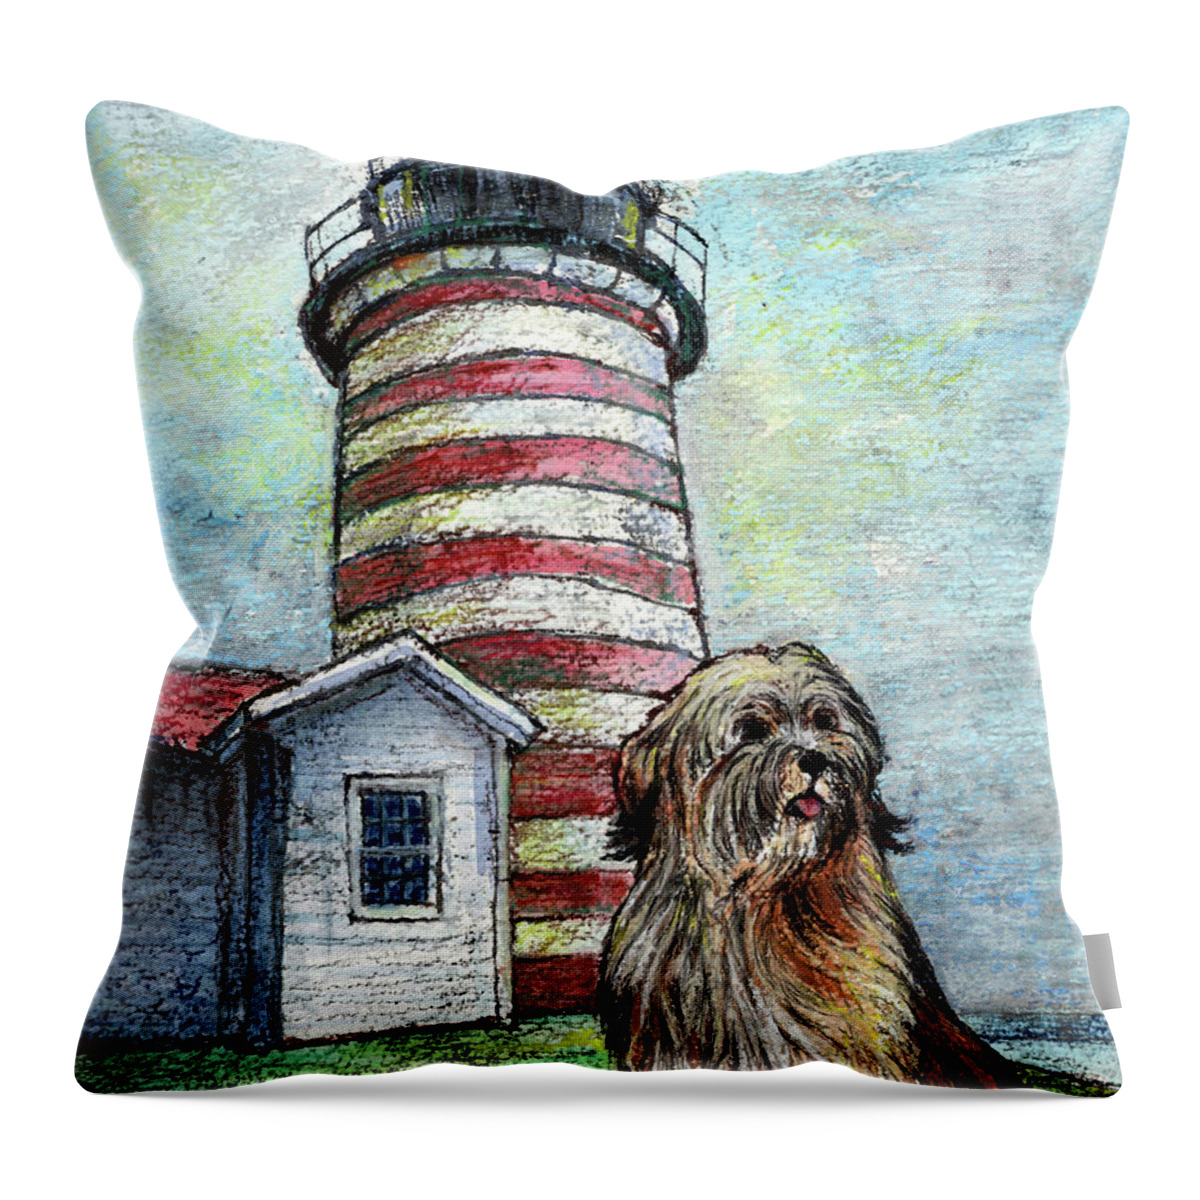 West Quoddy Head Throw Pillow featuring the mixed media West Quoddy Head by AnneMarie Welsh